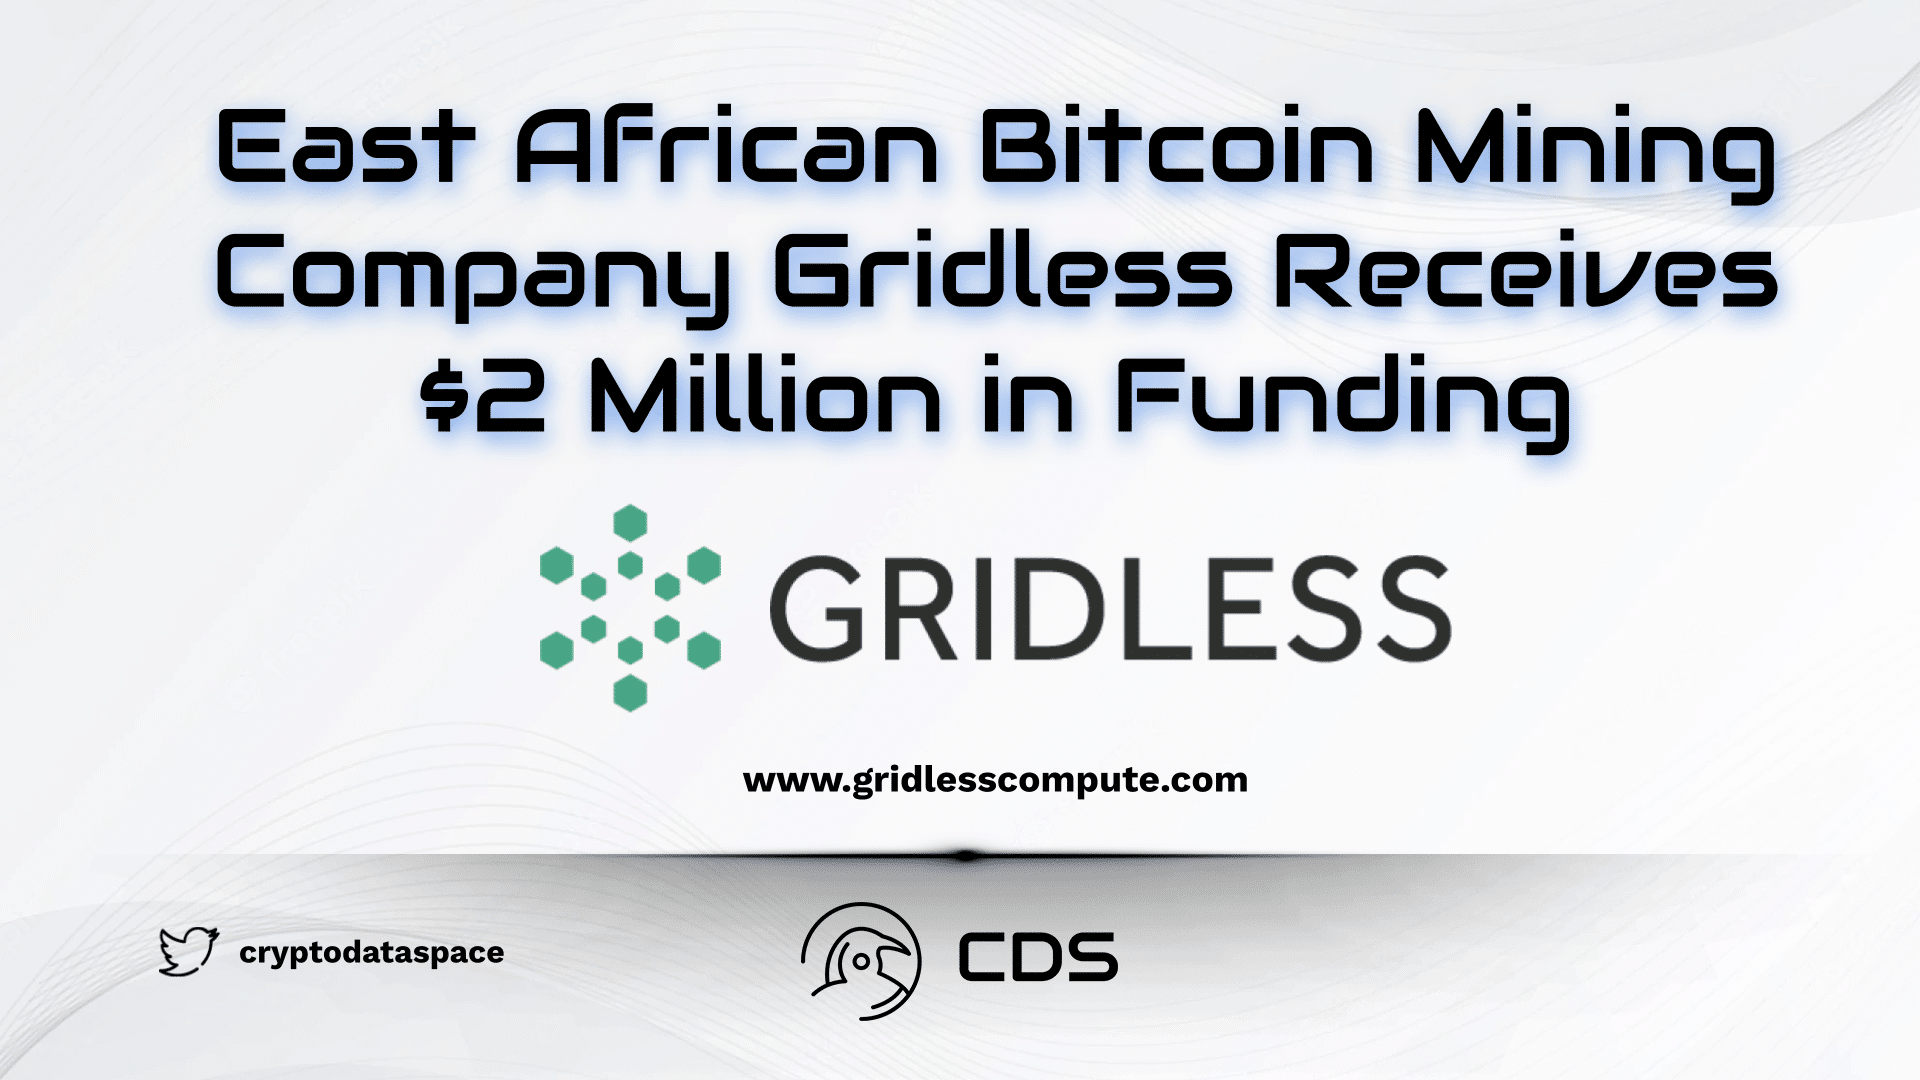 East African Bitcoin Mining Company Gridless Receives $2 Million in Funding